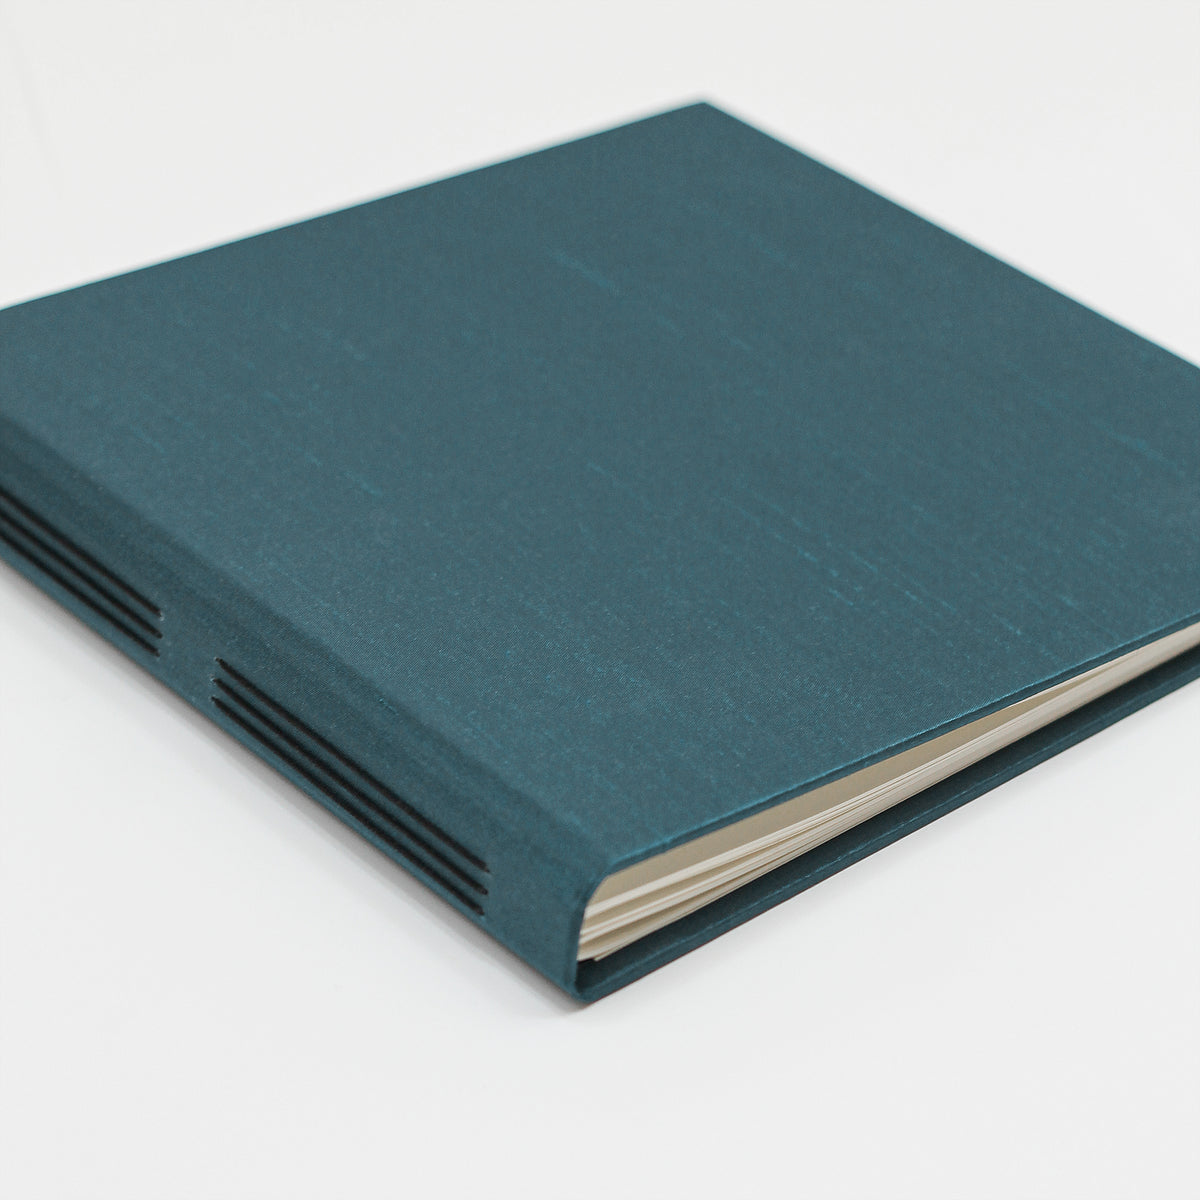 Event Guestbook Embossed with “Guests” | Cover: Teal Blue Silk | Available Personalized